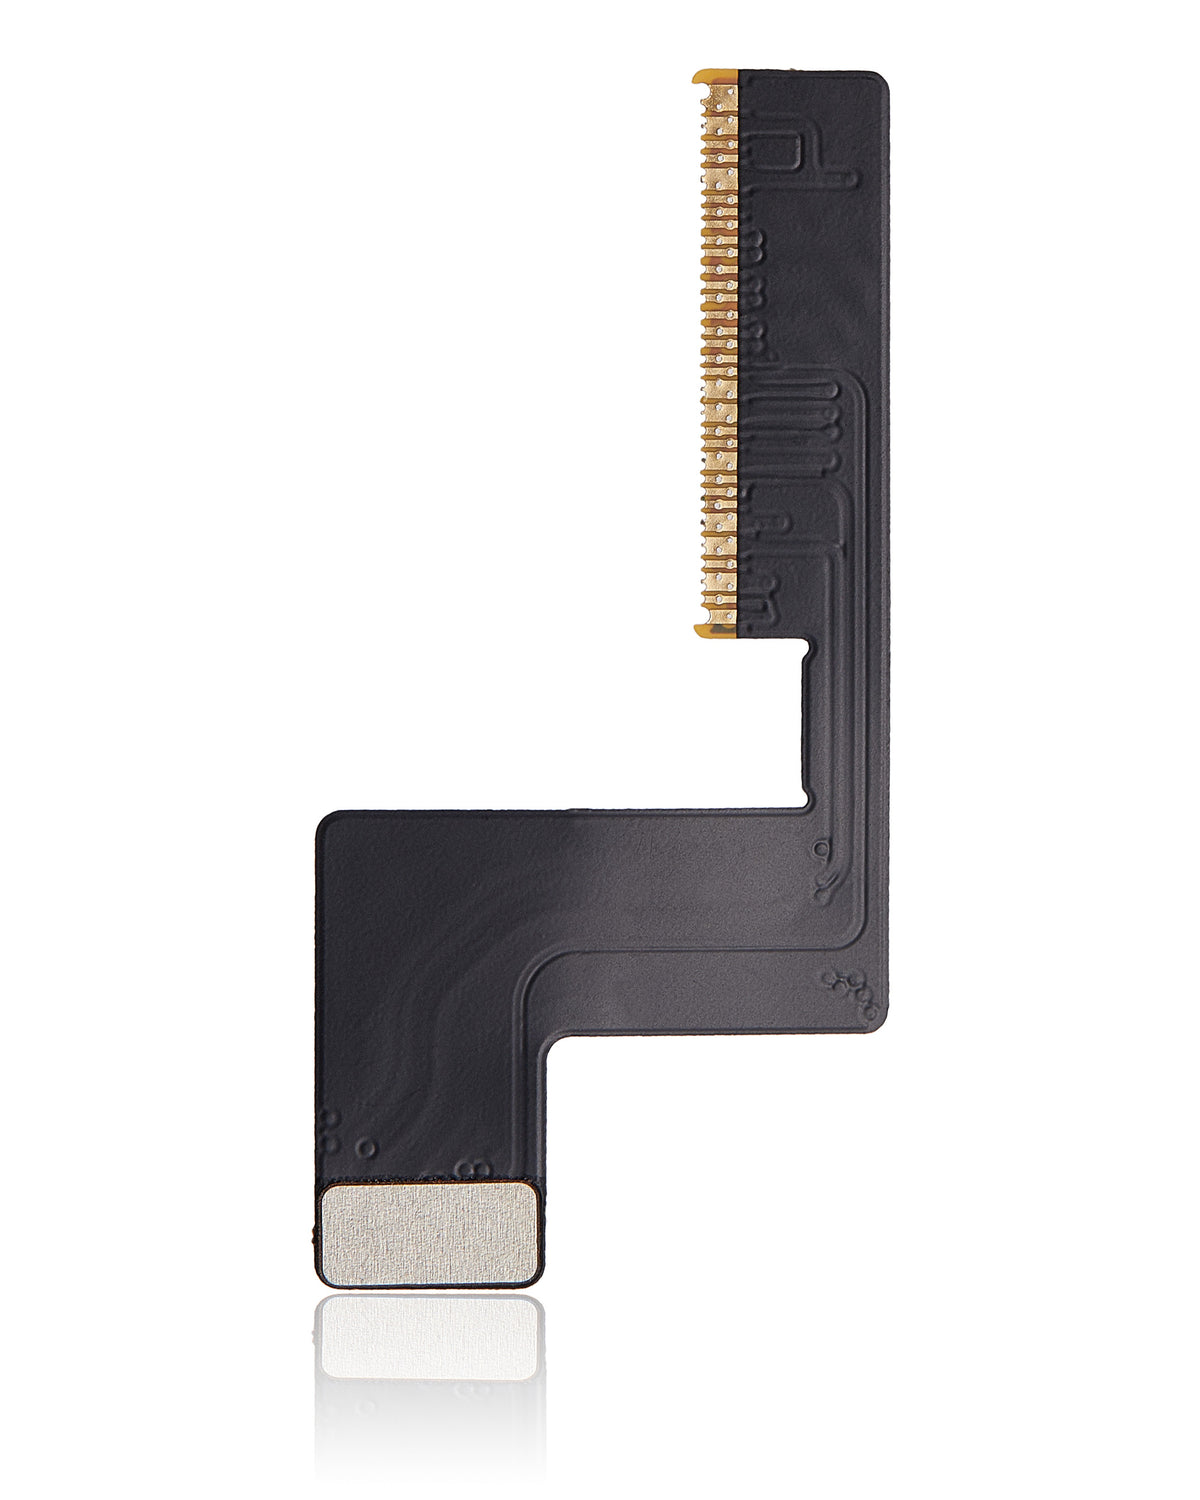 WIDE CAMERA FLEX  (SOLDERING REQUIRED) COMPATIBLE WITH IPHONE 12 PRO MAX